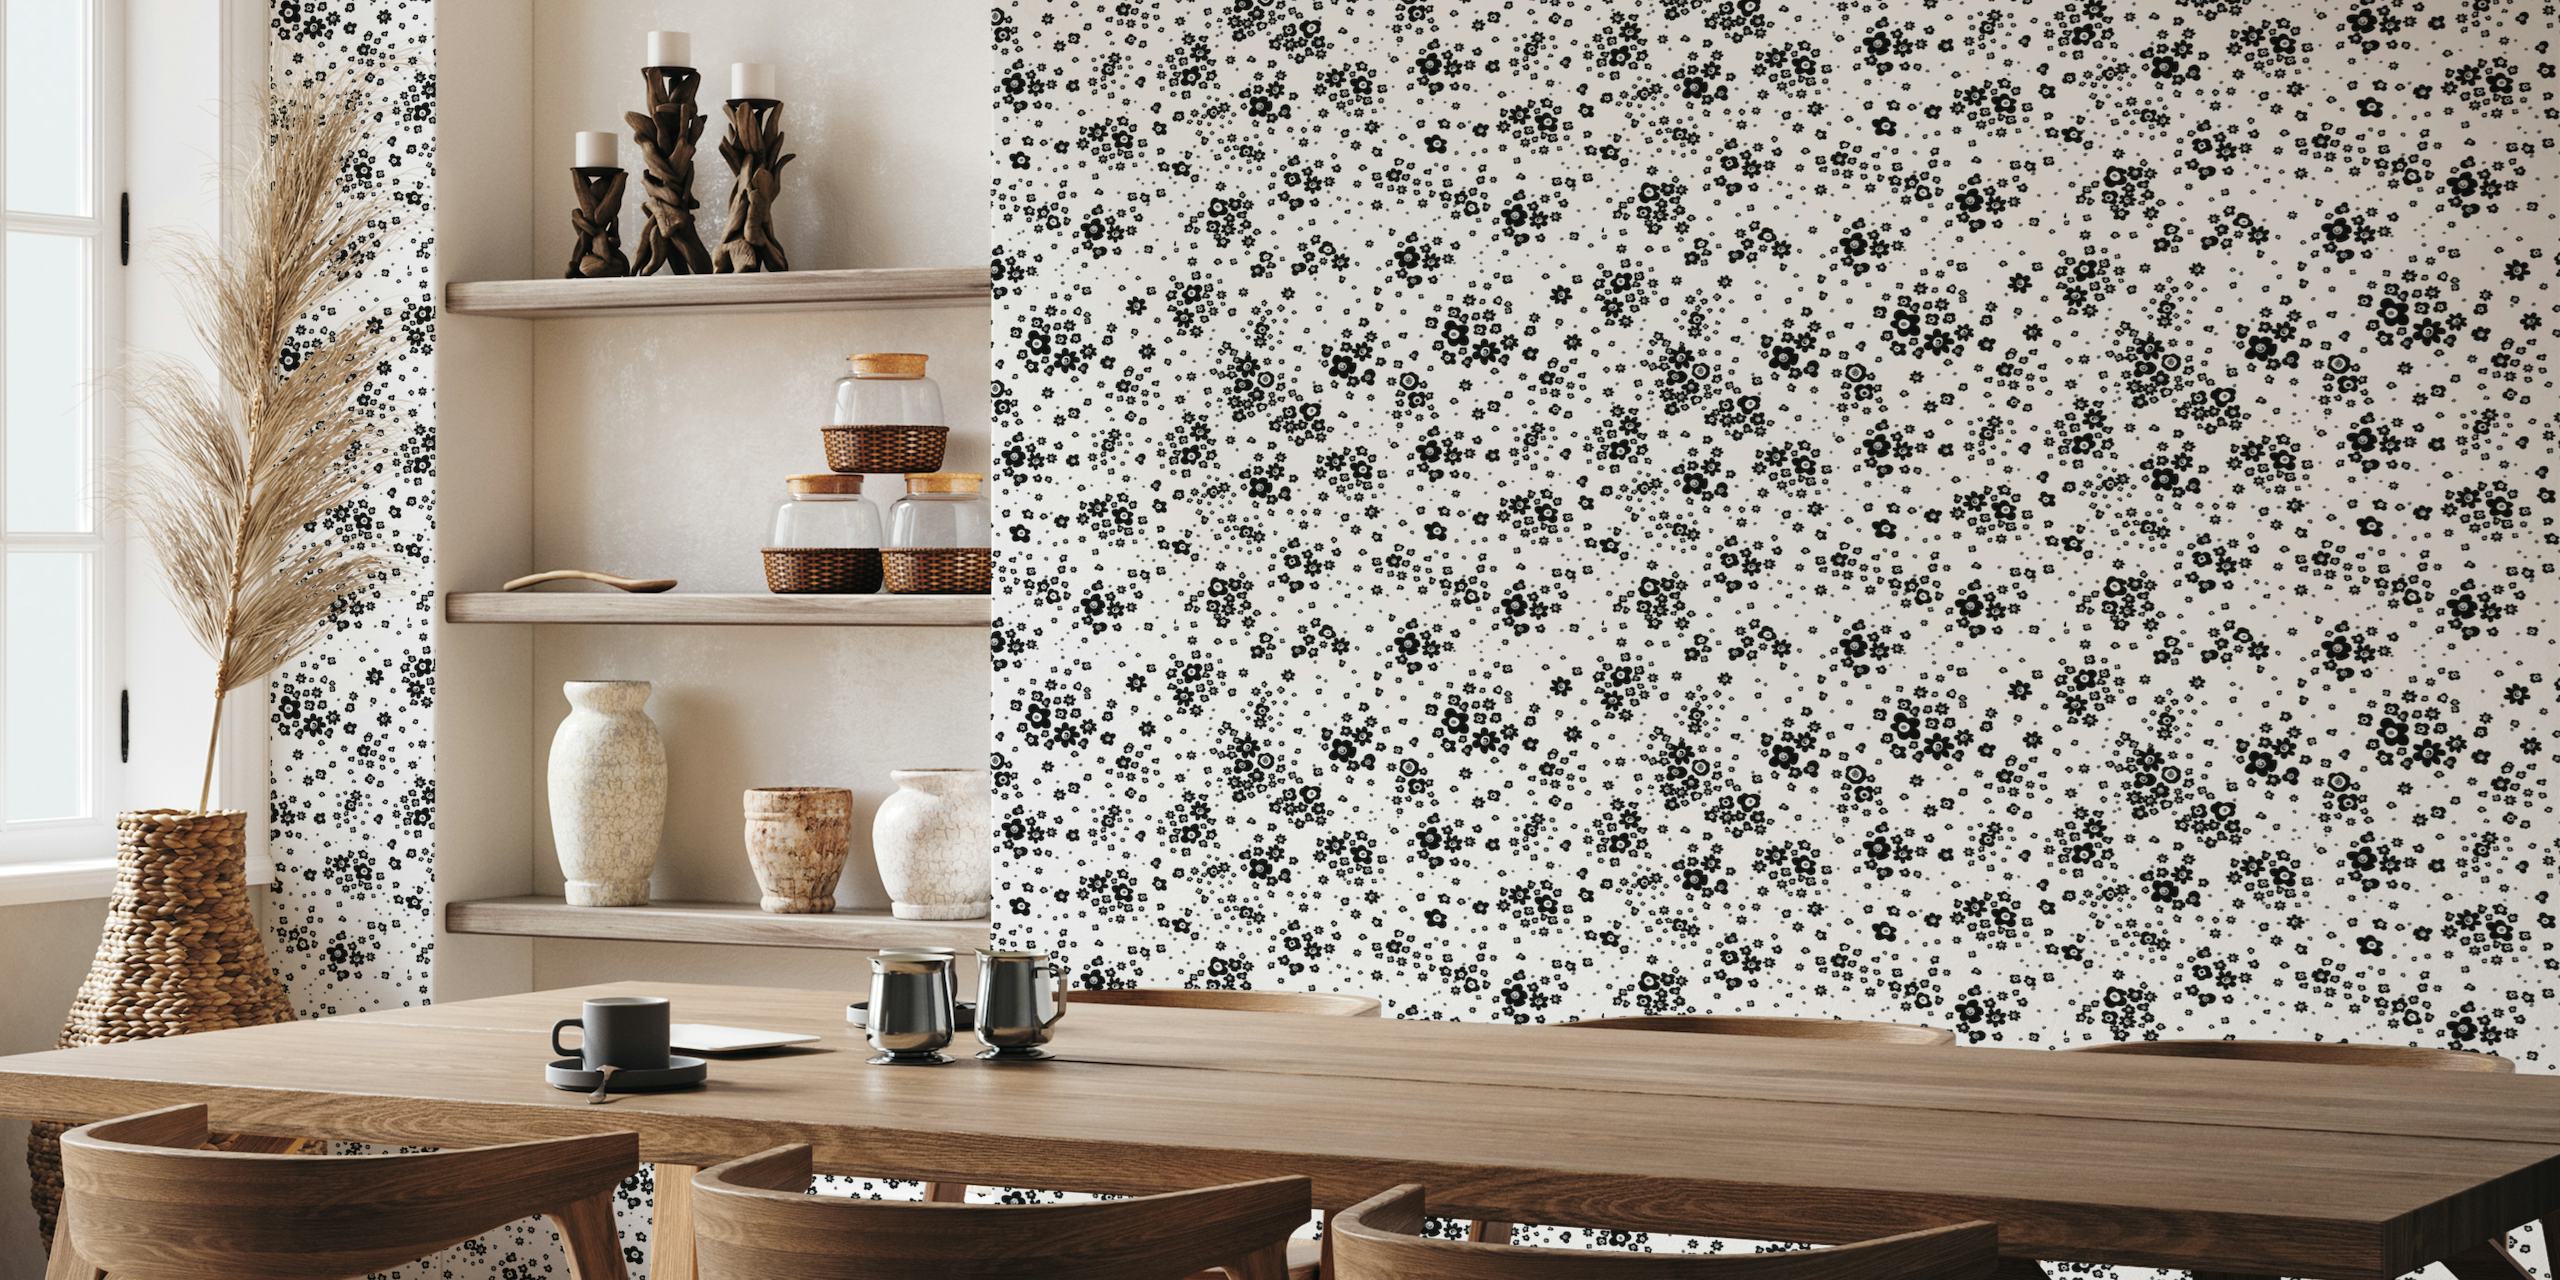 Black and white artistic wild ditsy flowers pattern tapete